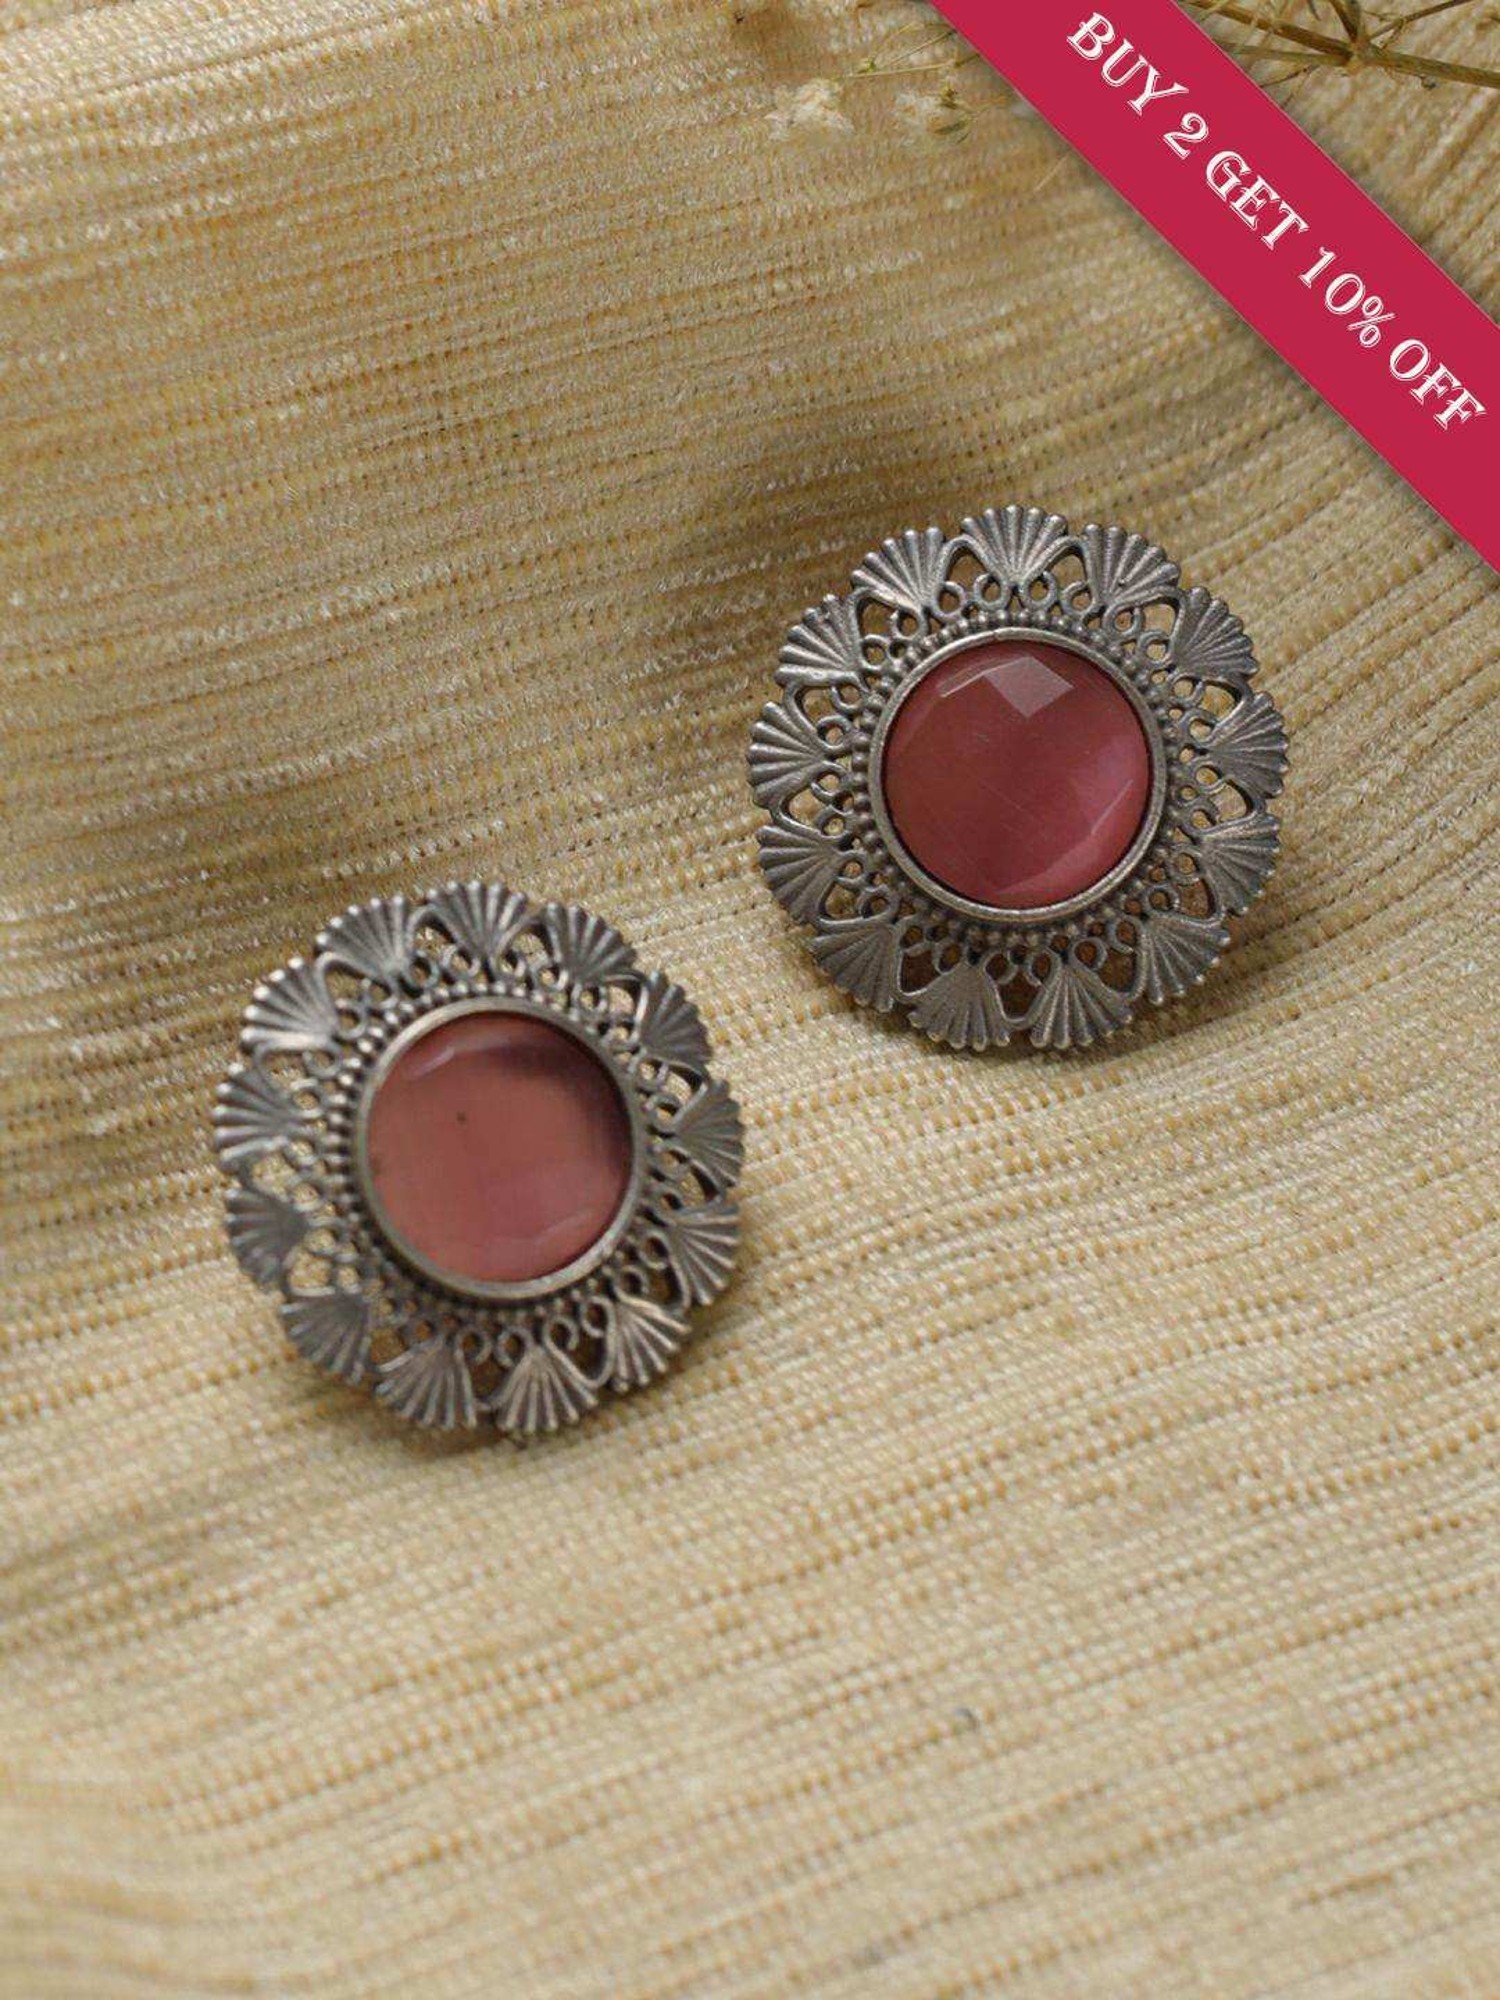 Priyaasi Pink Stone Studded Engraved Oxidised Silver Stud Earrings Buy  Priyaasi Pink Stone Studded Engraved Oxidised Silver Stud Earrings Online  at Best Price in India  Nykaa